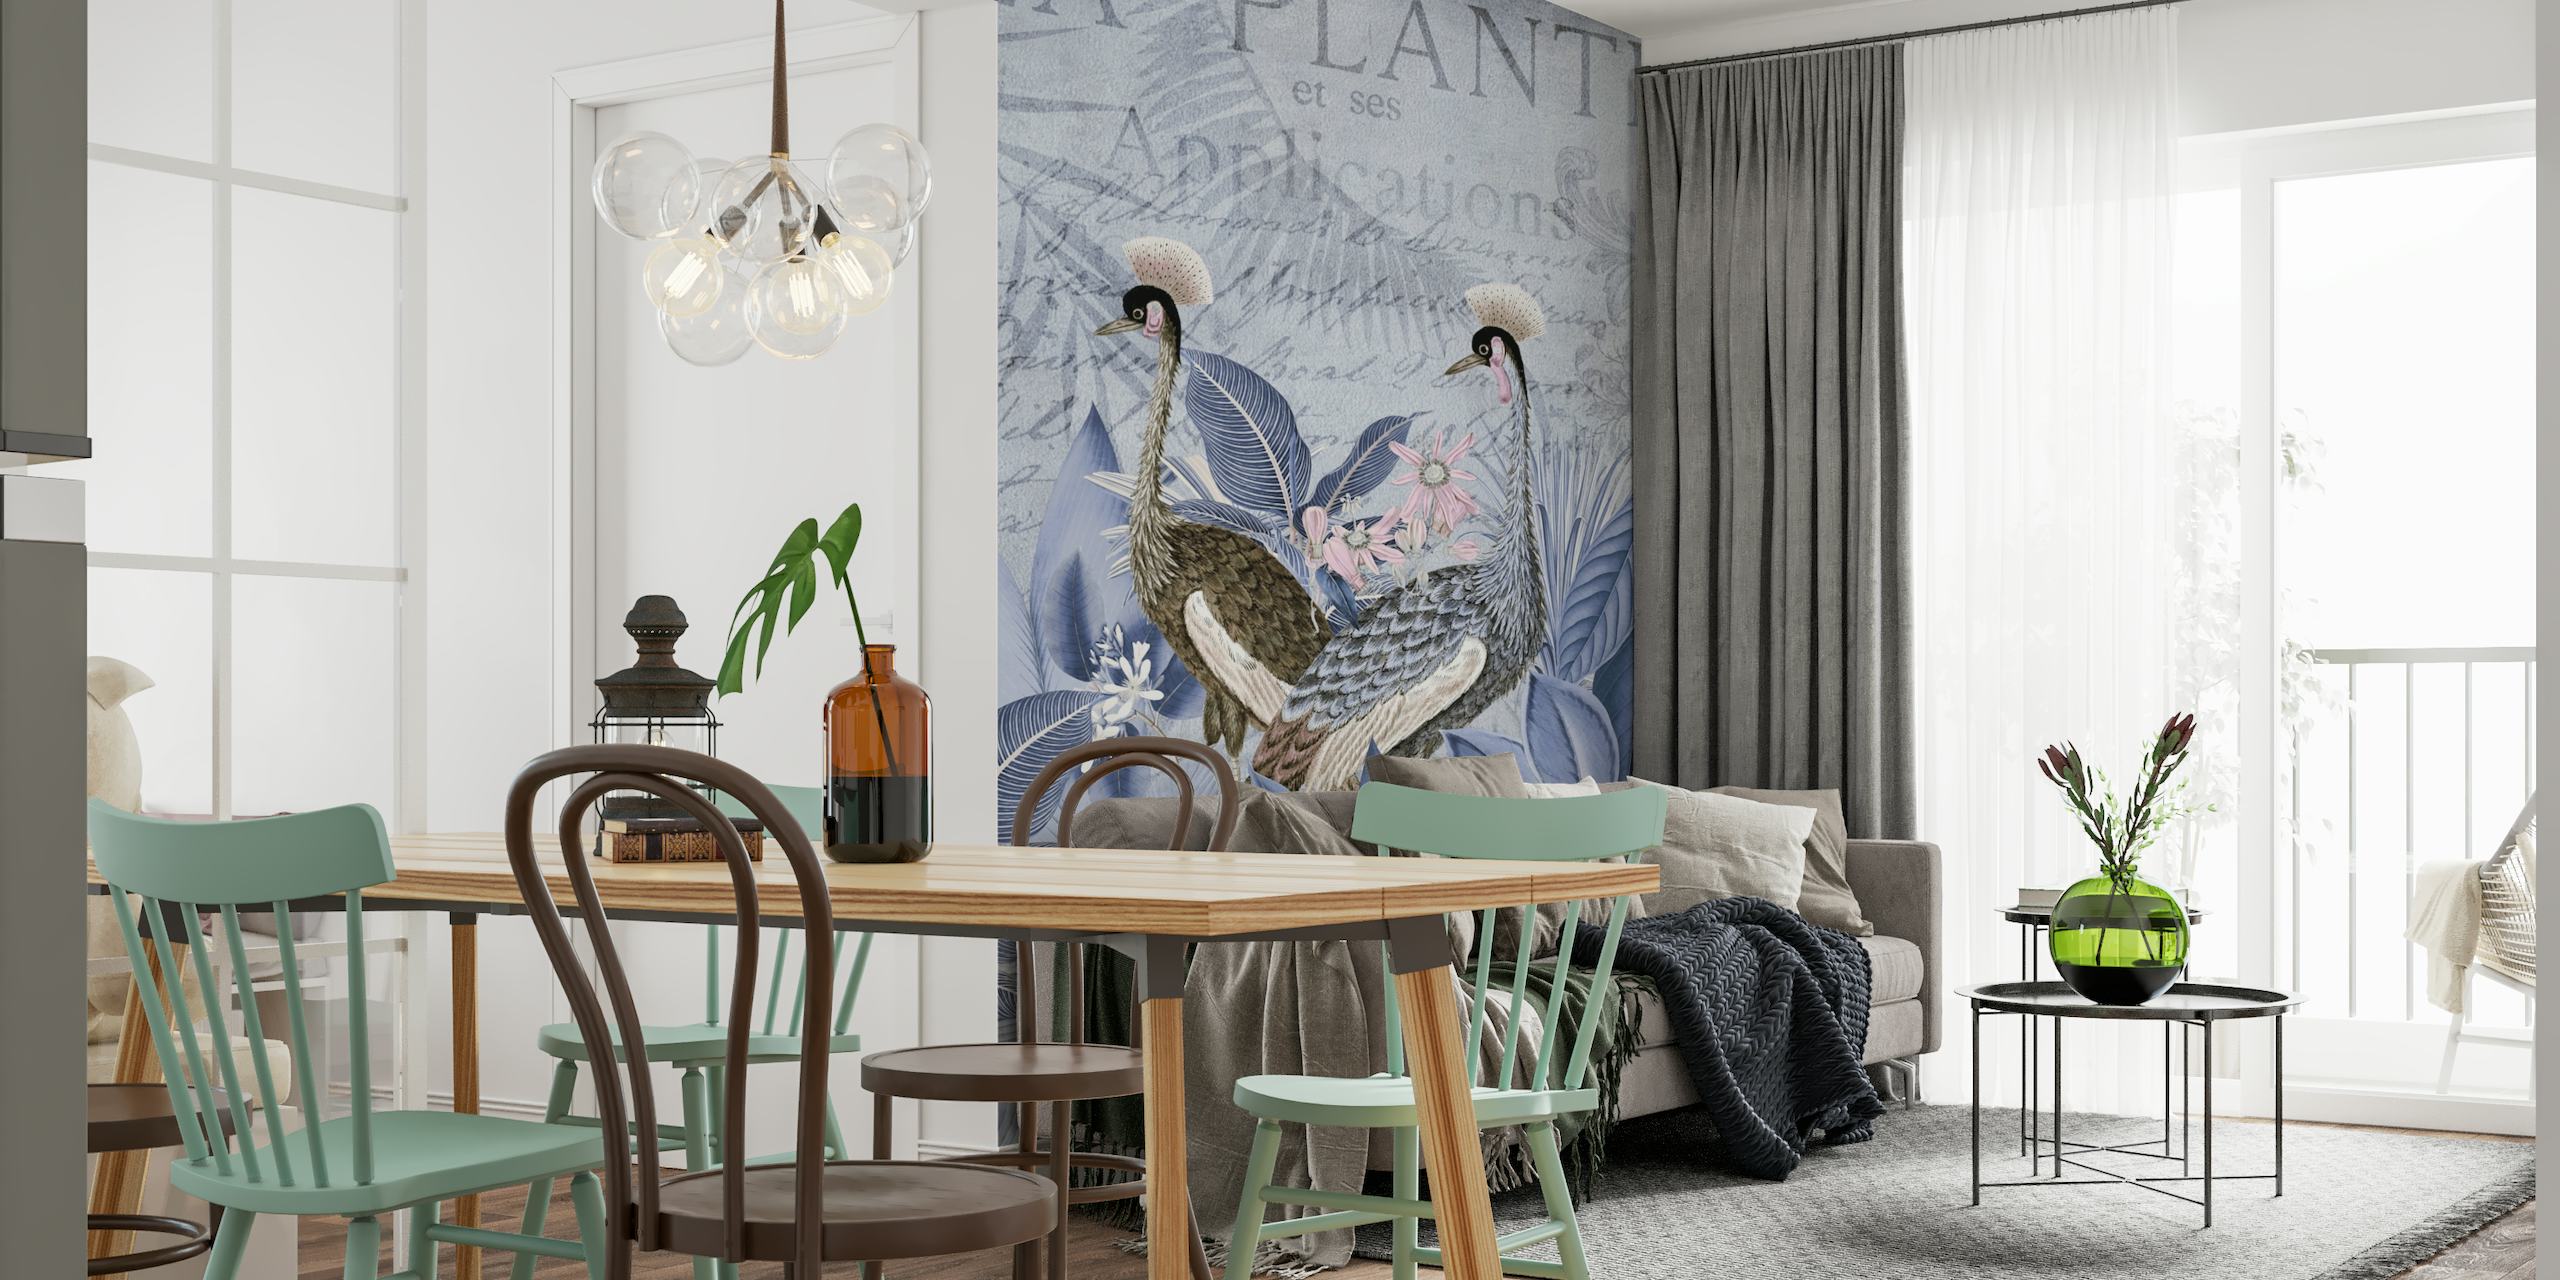 Elegant blue cranes among foliage and vintage script on a wall mural